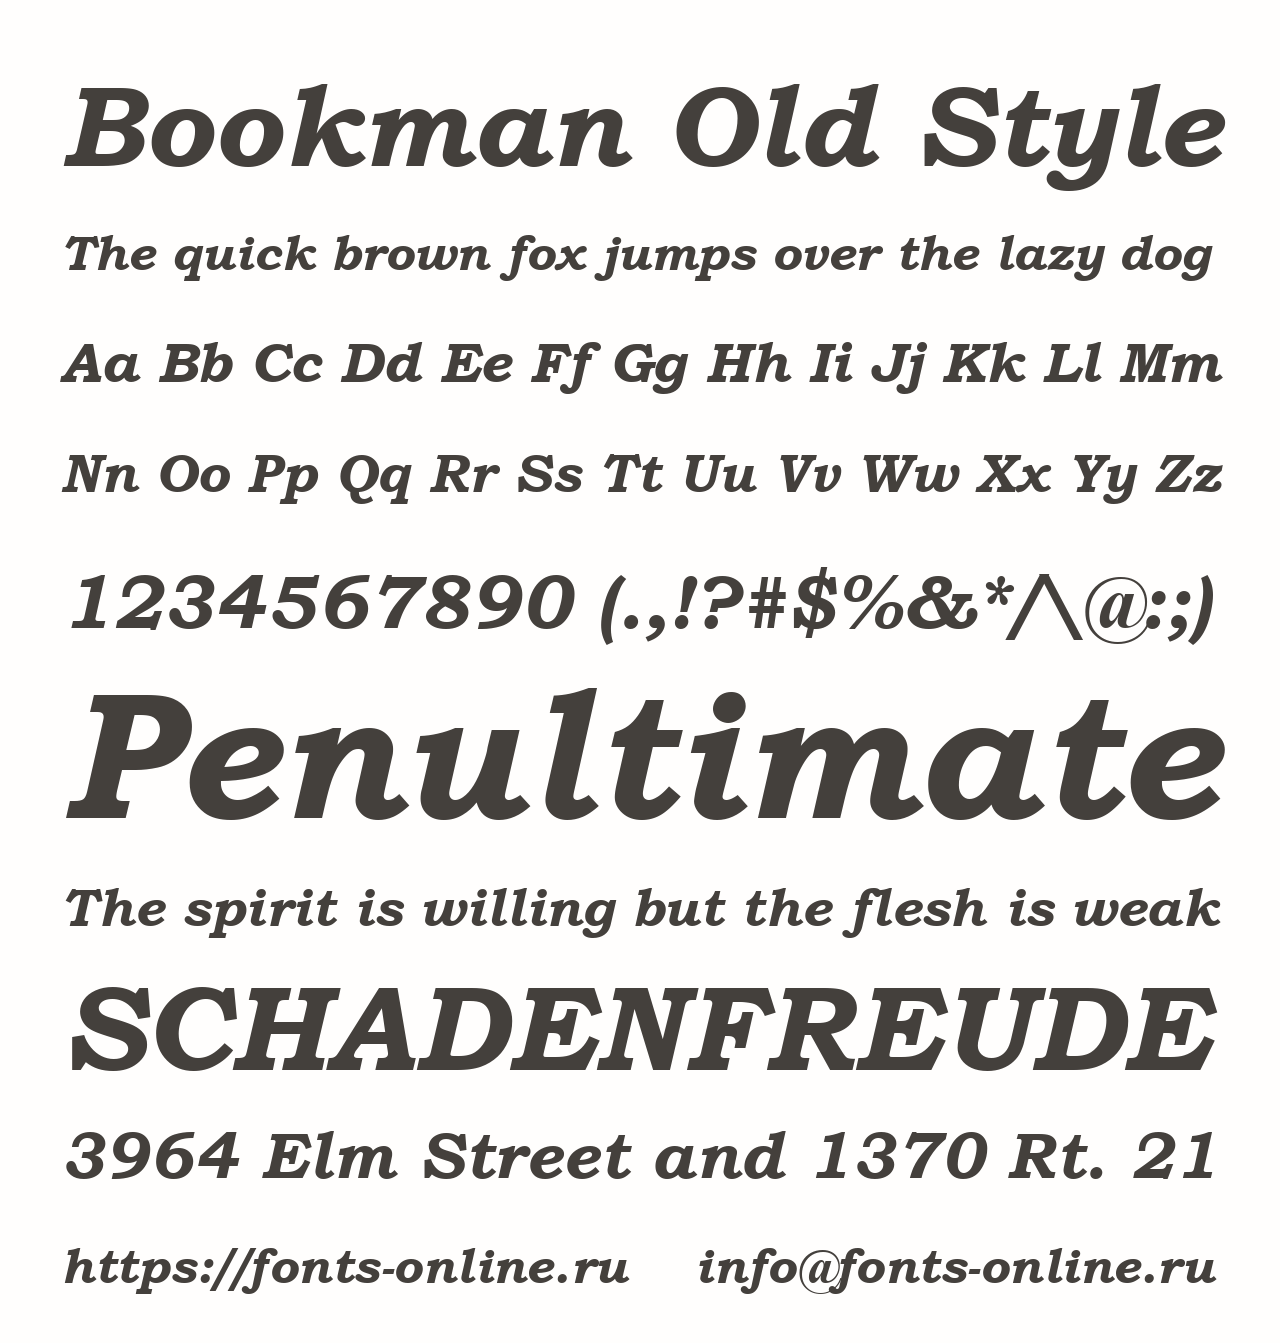 bookman old style font free download mac